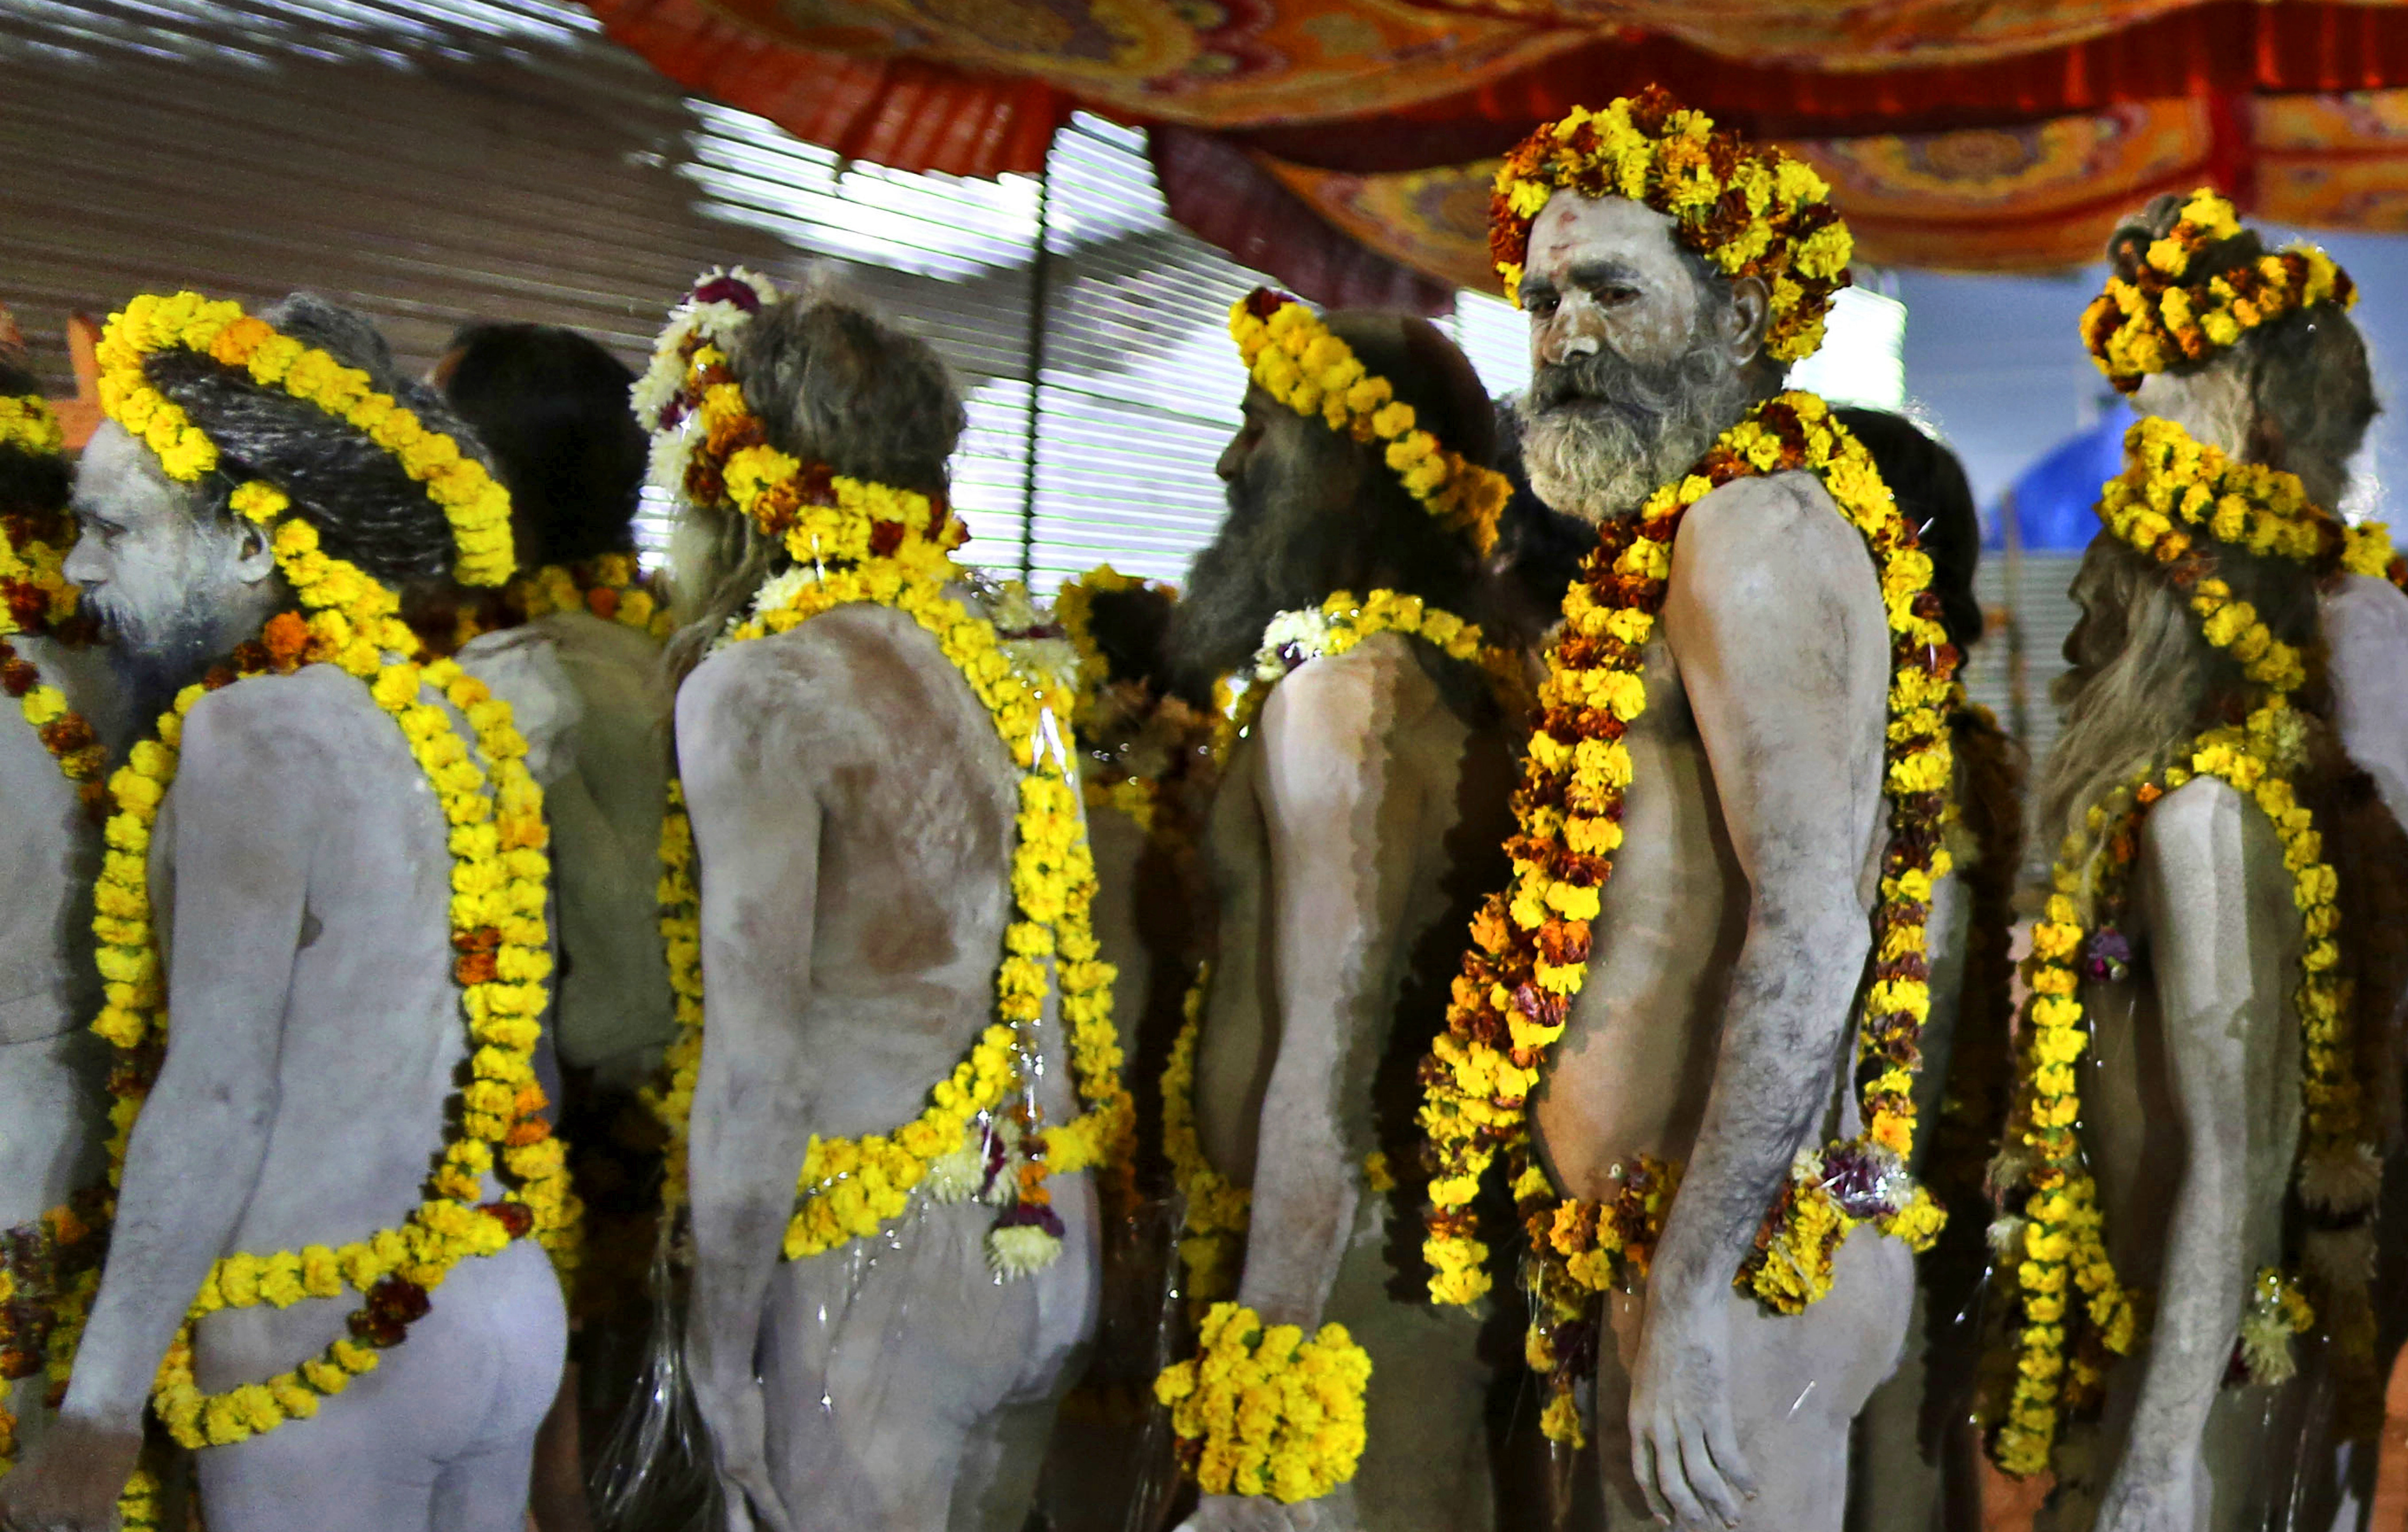 Naked Hindu holy men leave their camp for ritualistic dip on auspicious Makar Sankranti day during the Kumbh Mela, or pitcher festival in Prayagraj, Uttar Pradesh state, India, Tuesday, Jan.15, 2019. The Kumbh Mela is a series of ritual baths by Hindu holy men, and other pilgrims at the confluence of three sacred rivers — the Yamuna, the Ganges and the mythical Saraswati — that dates back to at least medieval times. The city’s Mughal-era name Allahabad was recently changed to Prayagraj. (AP Photo/Rajesh Kumar Singh)